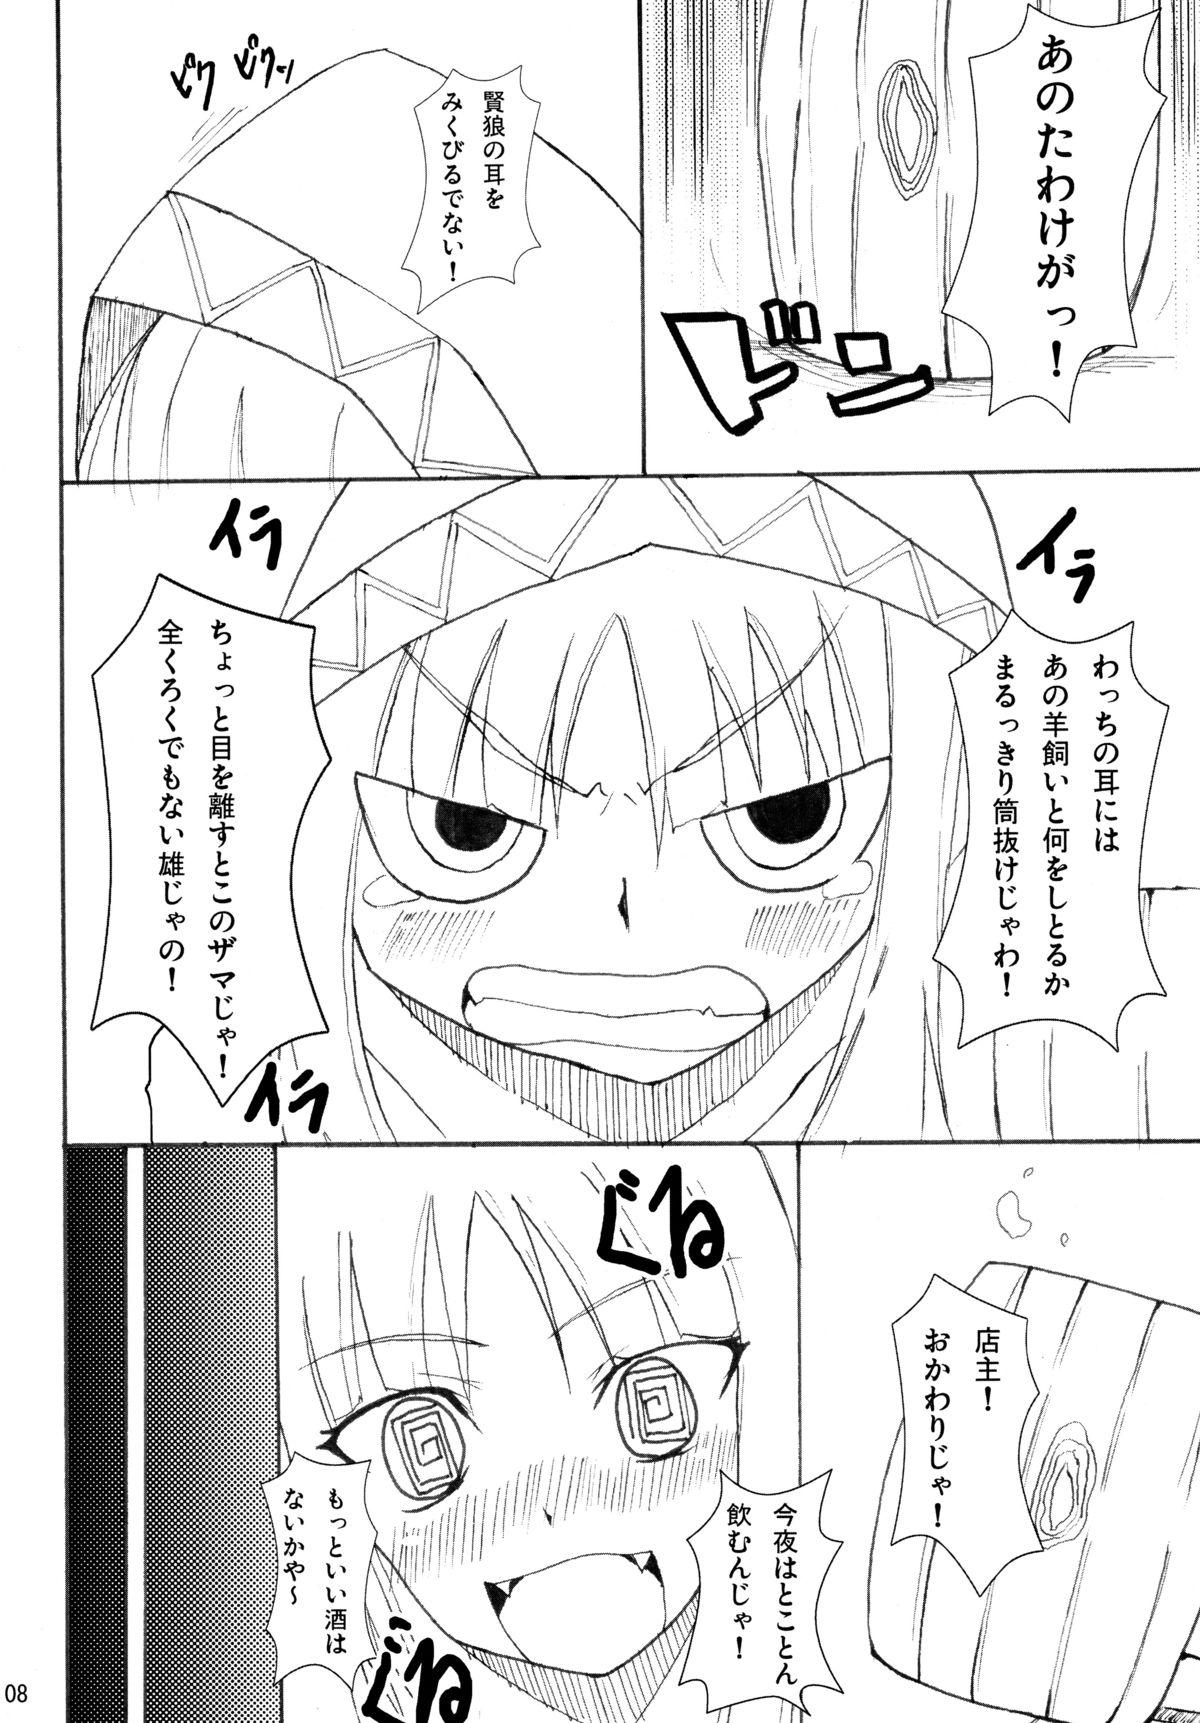 Moms Naked Spice - Spice and wolf Love - Page 8